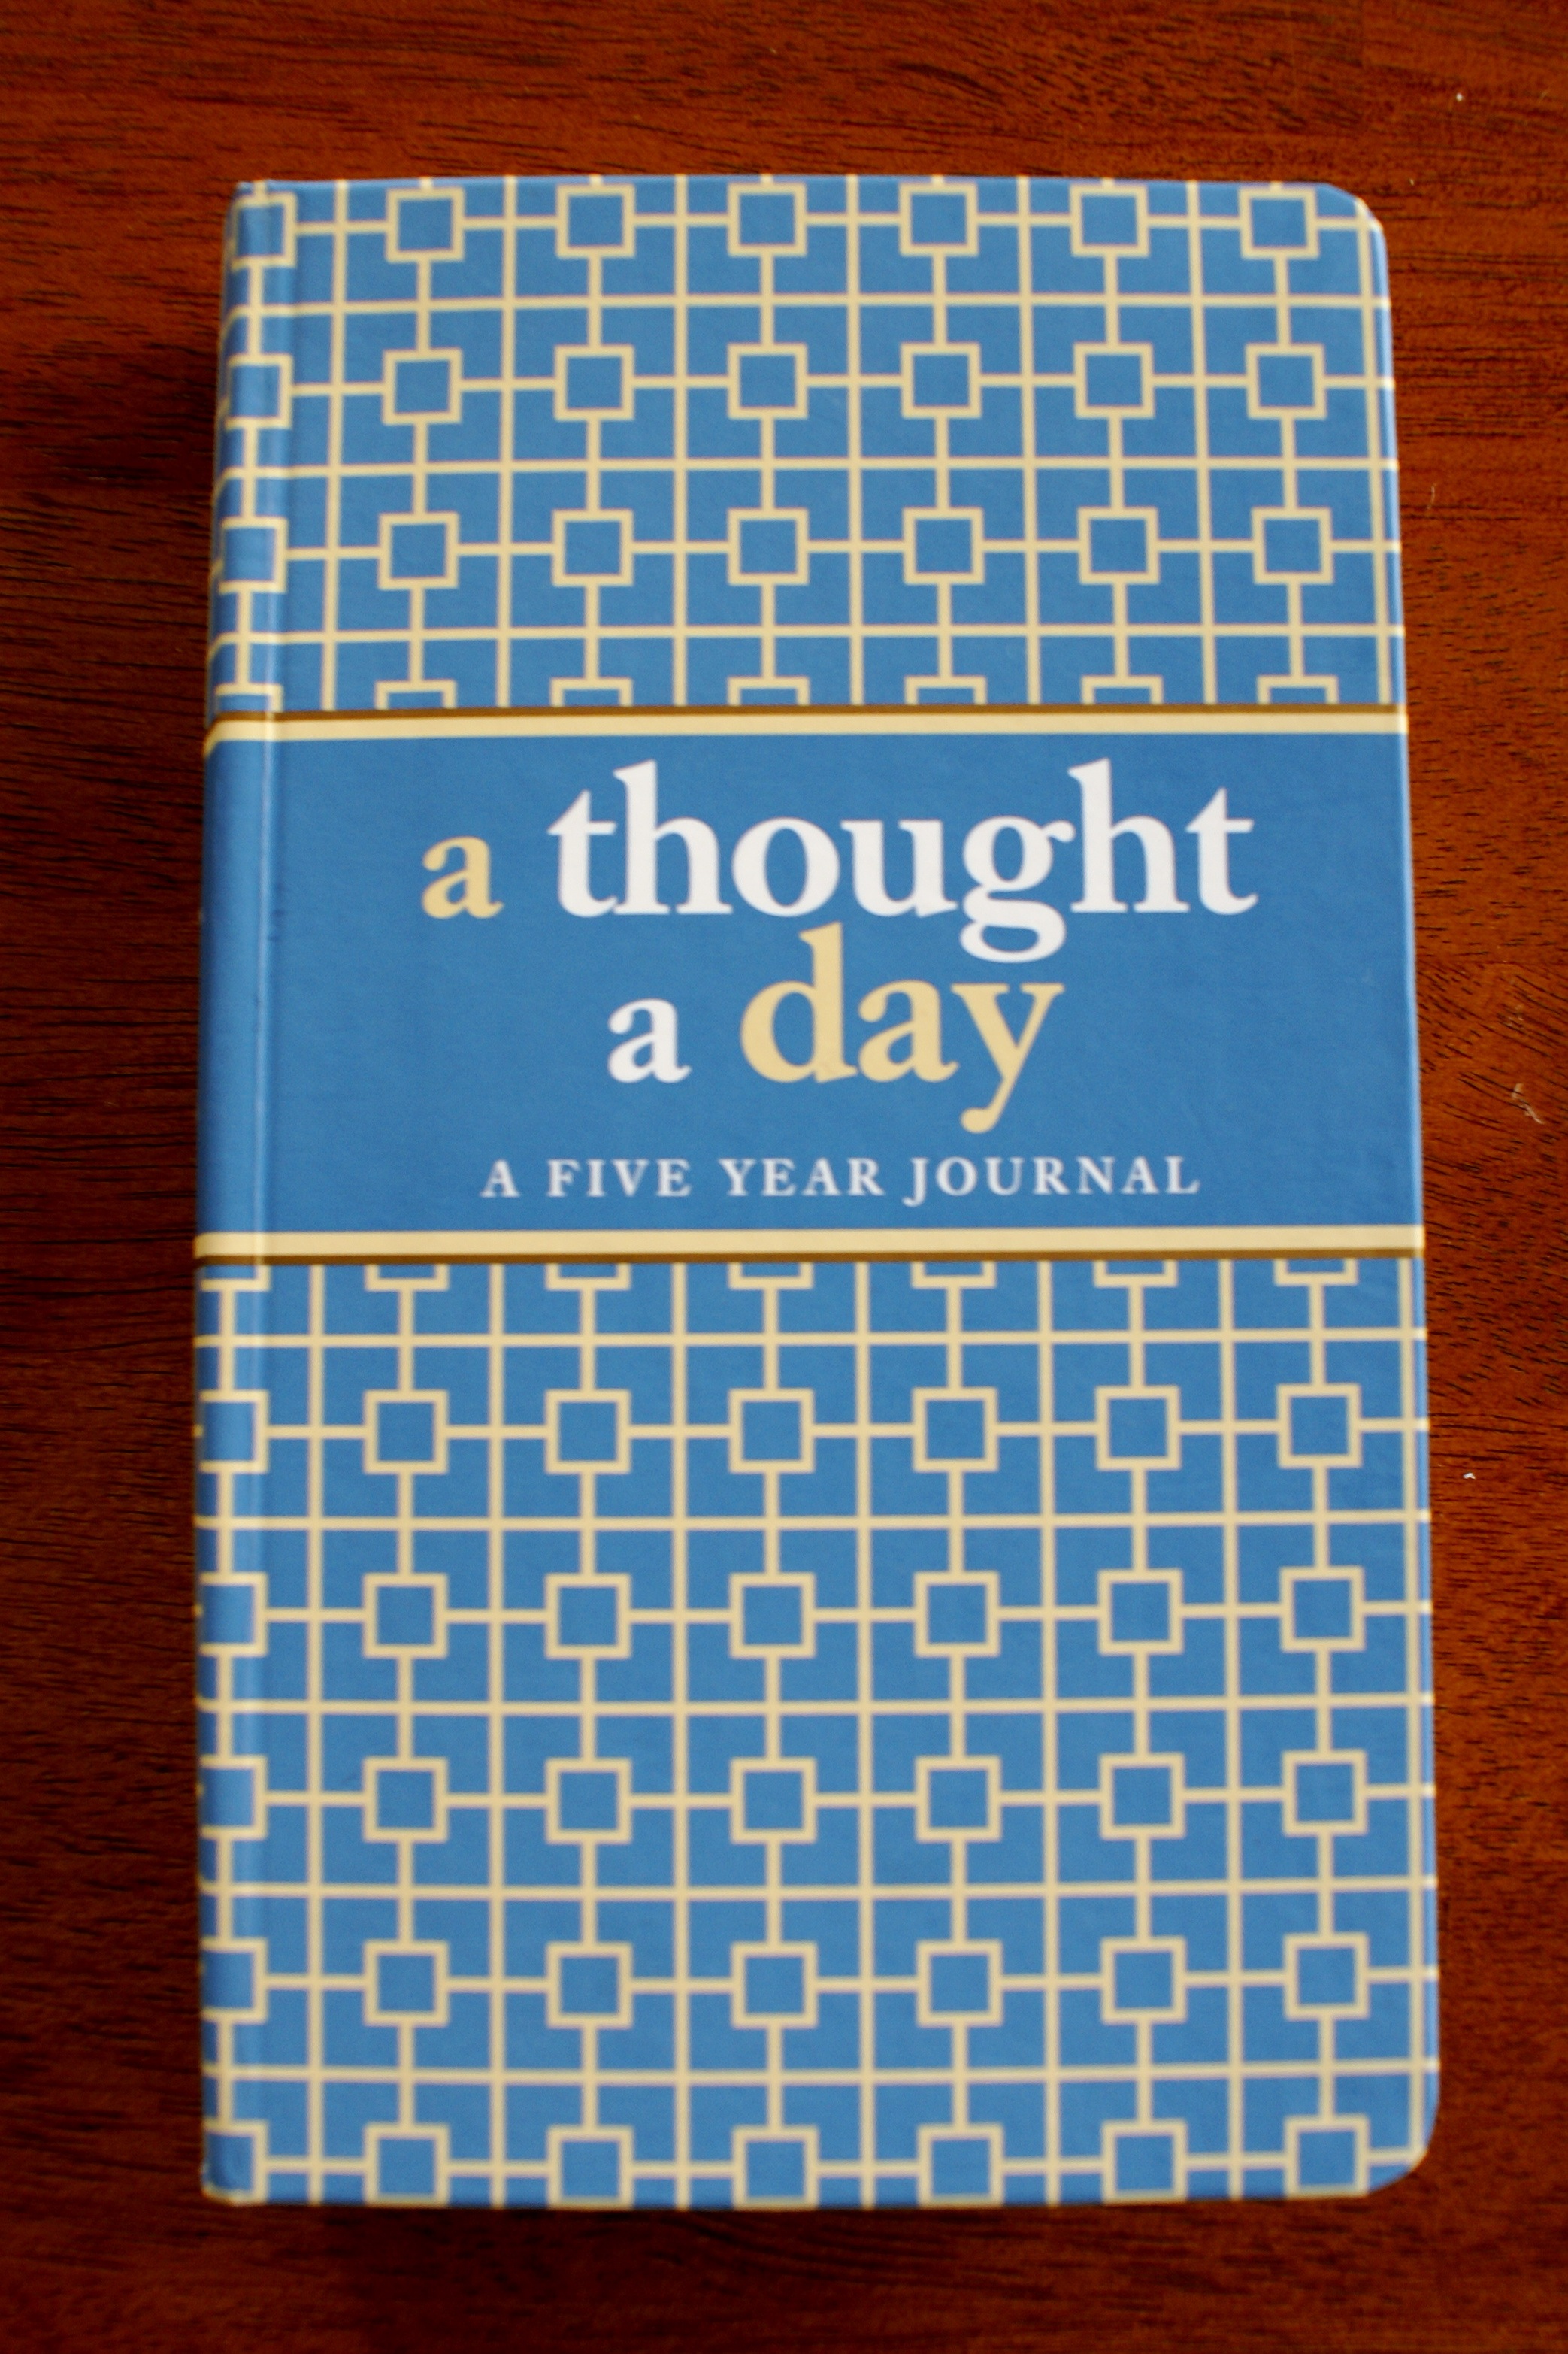 Nifty Item #2: A Thought a Day